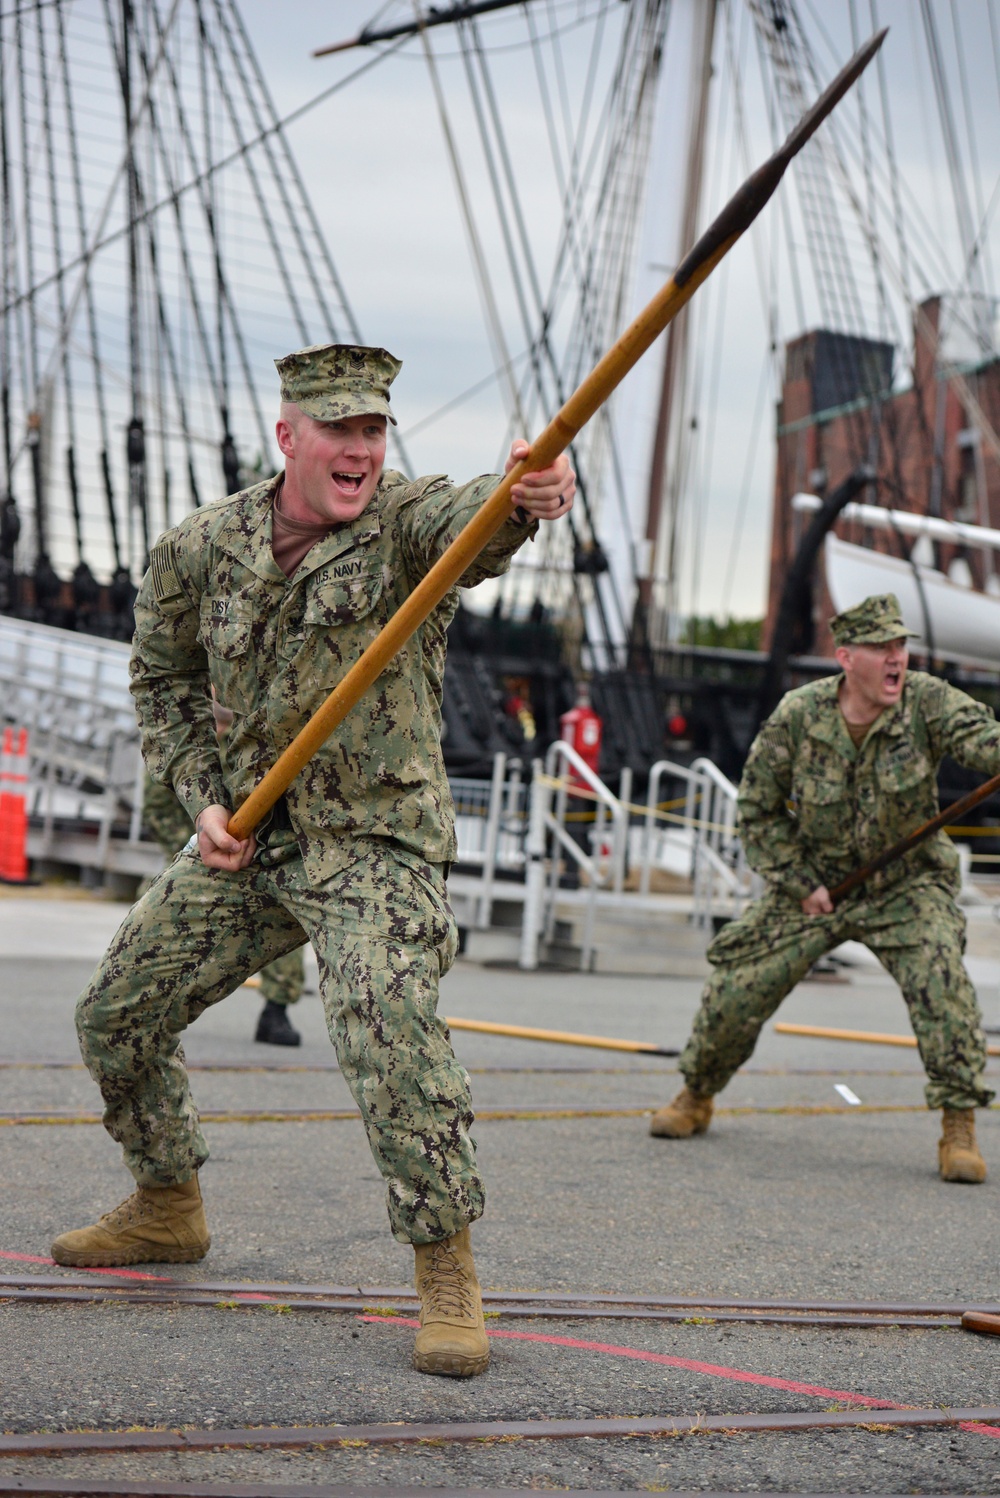 New Sailors try old ways at Constitution